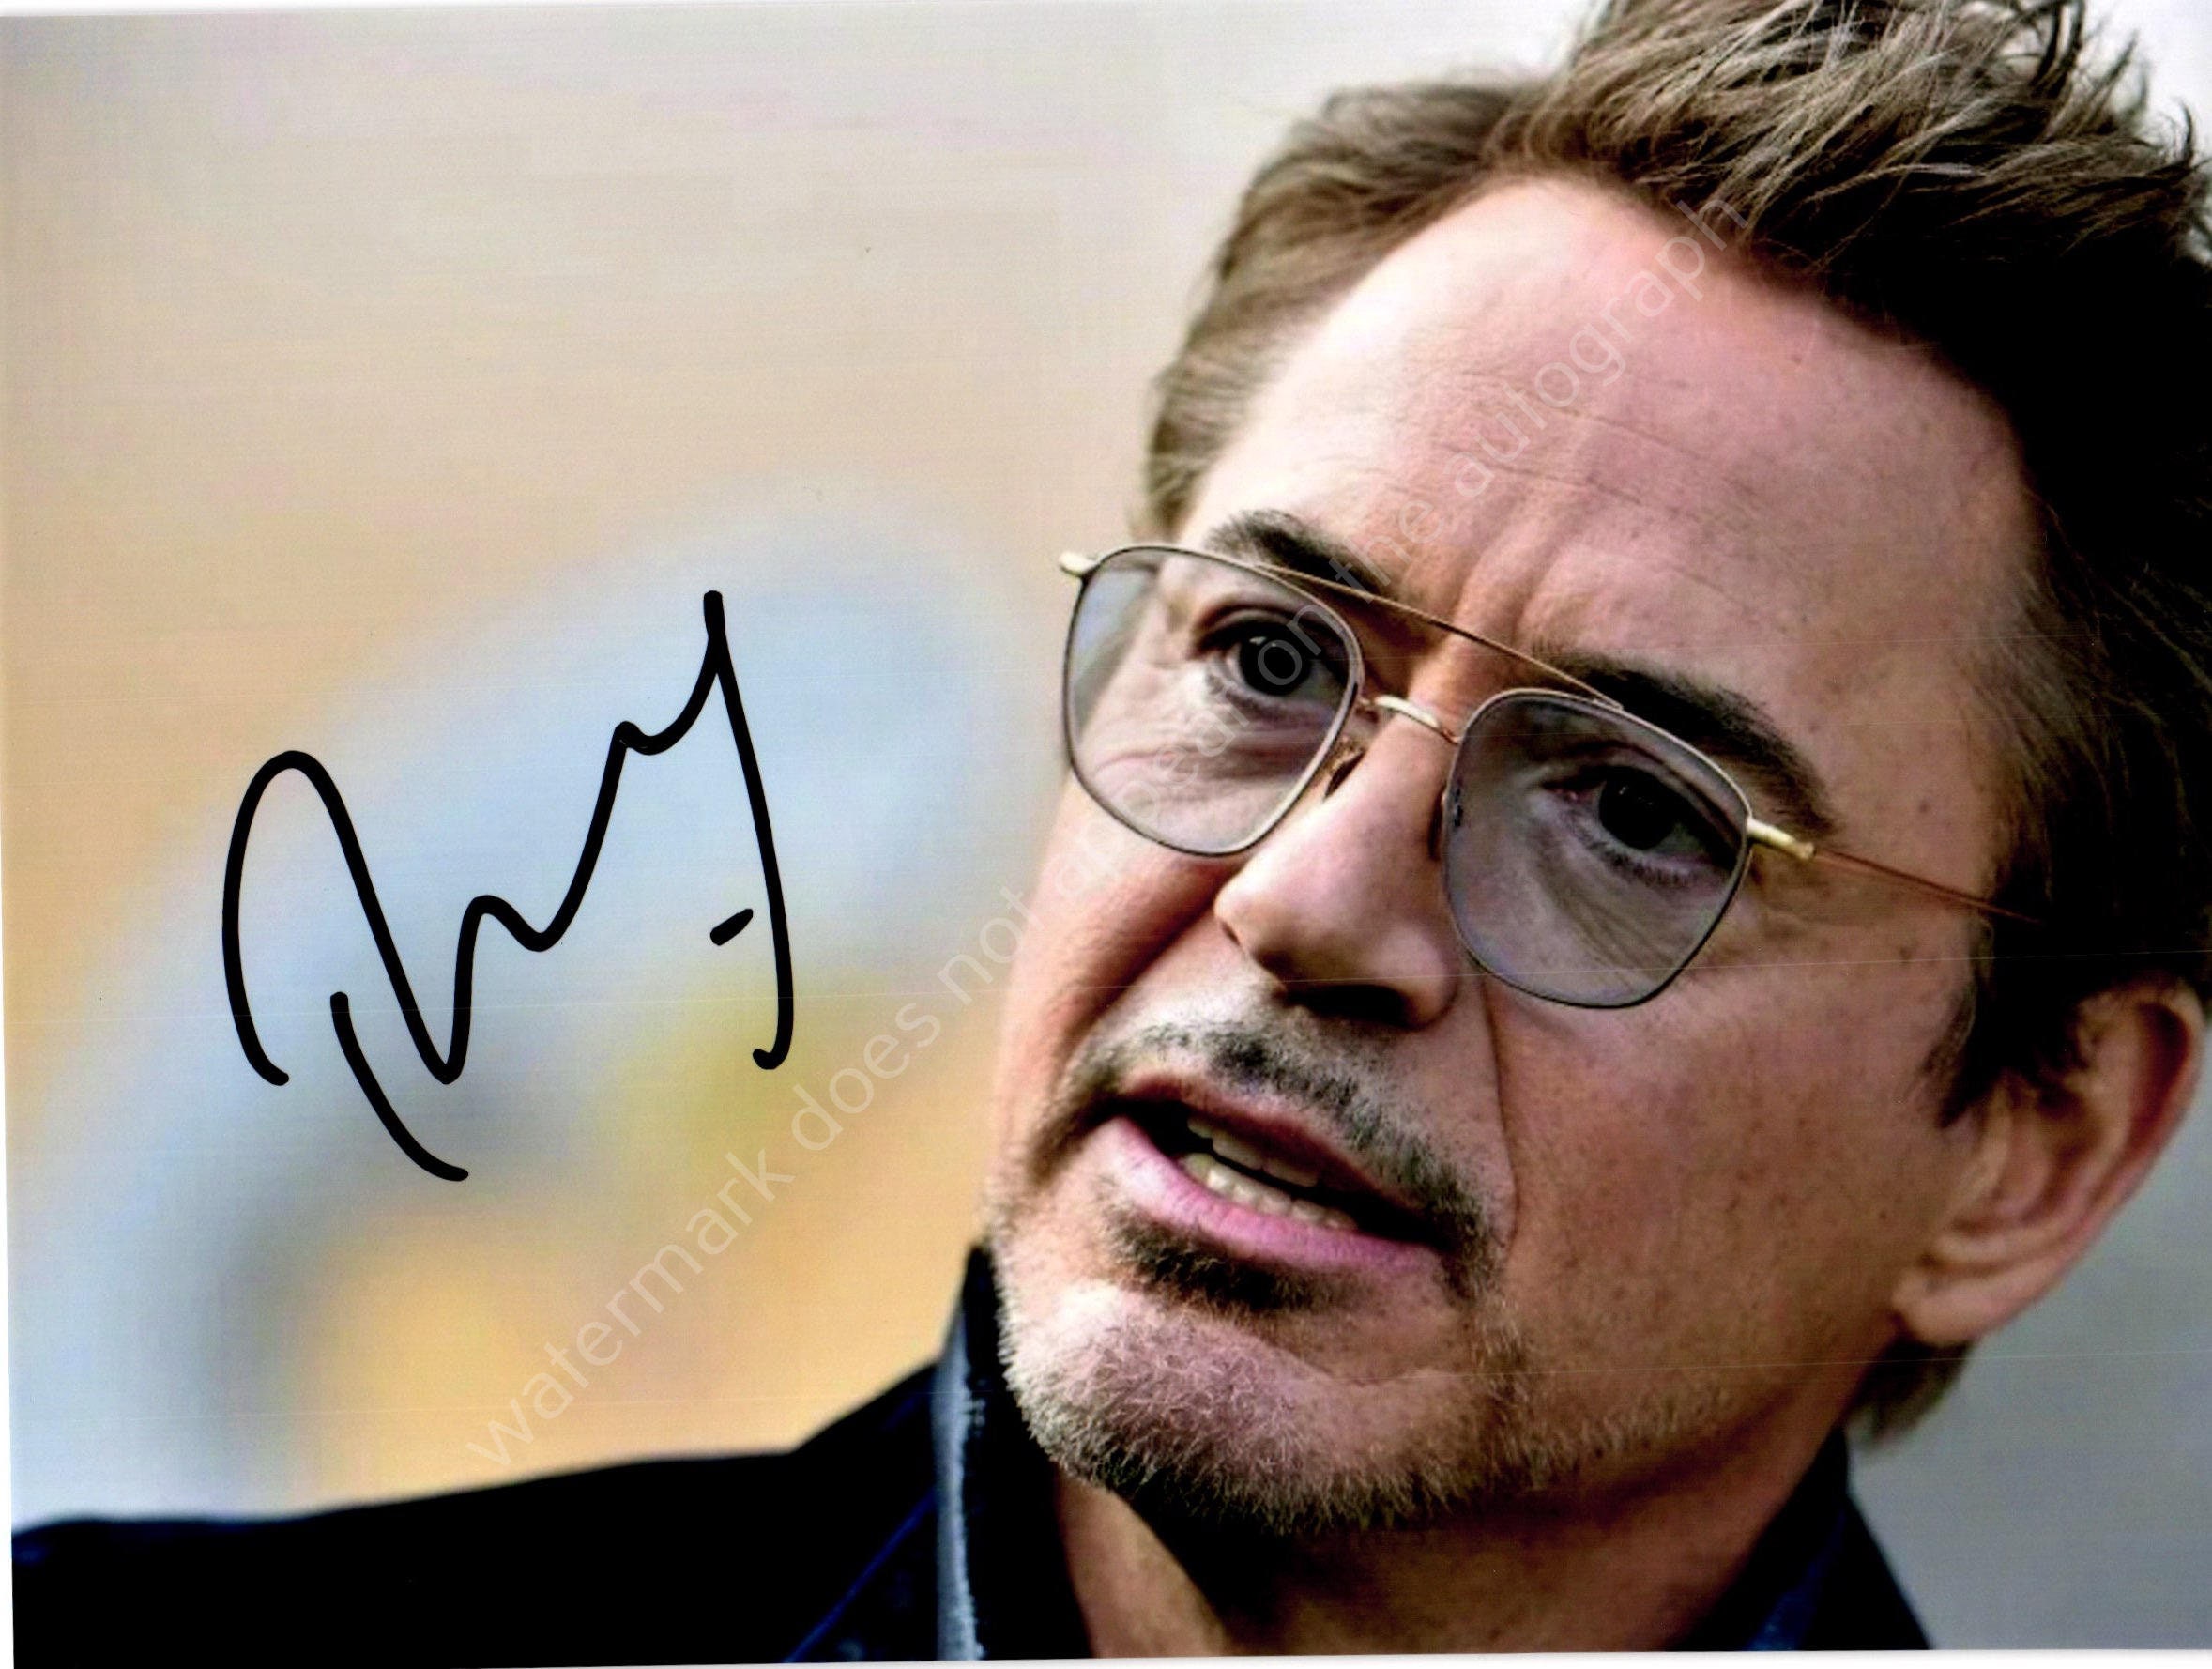 Robert Downey Jr Fan Account!! — “She will be Mrs Downey for the rest of  her days...